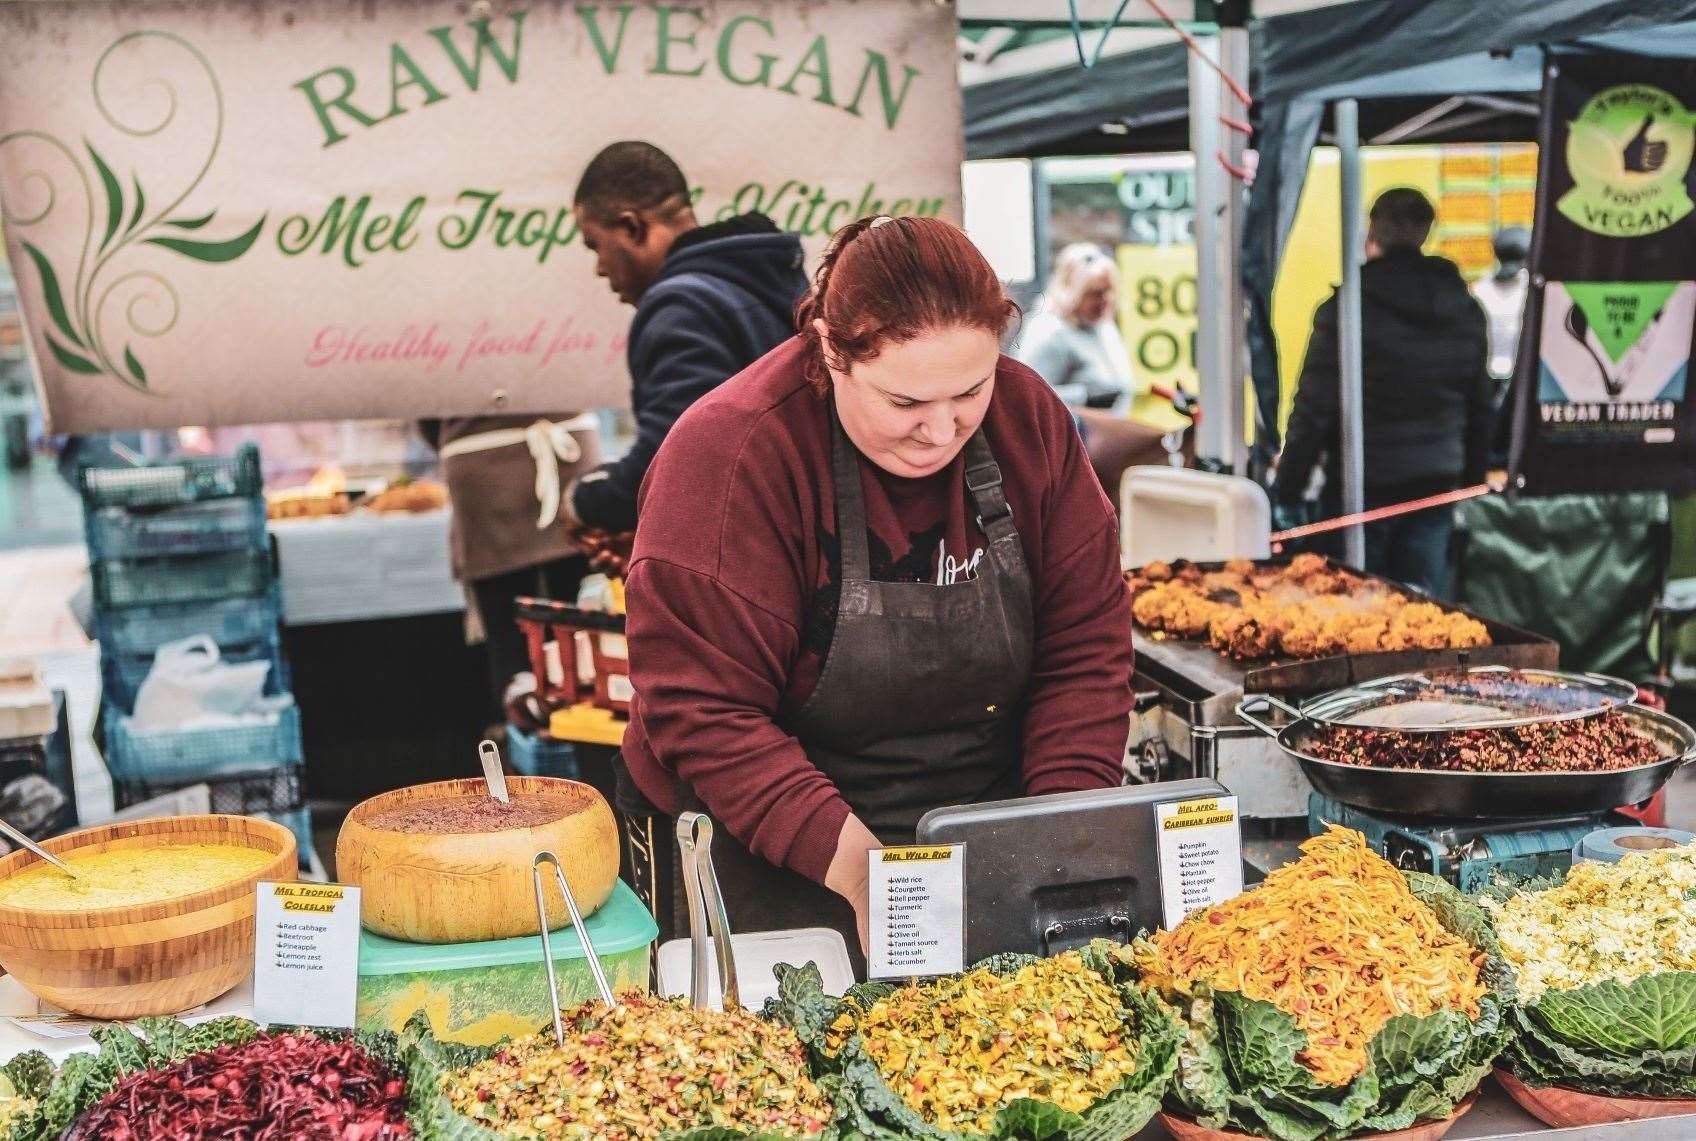 The market will showcase a wide variety of products - from street food to ethically sourced jewellery. Picture: Vegan Market Co